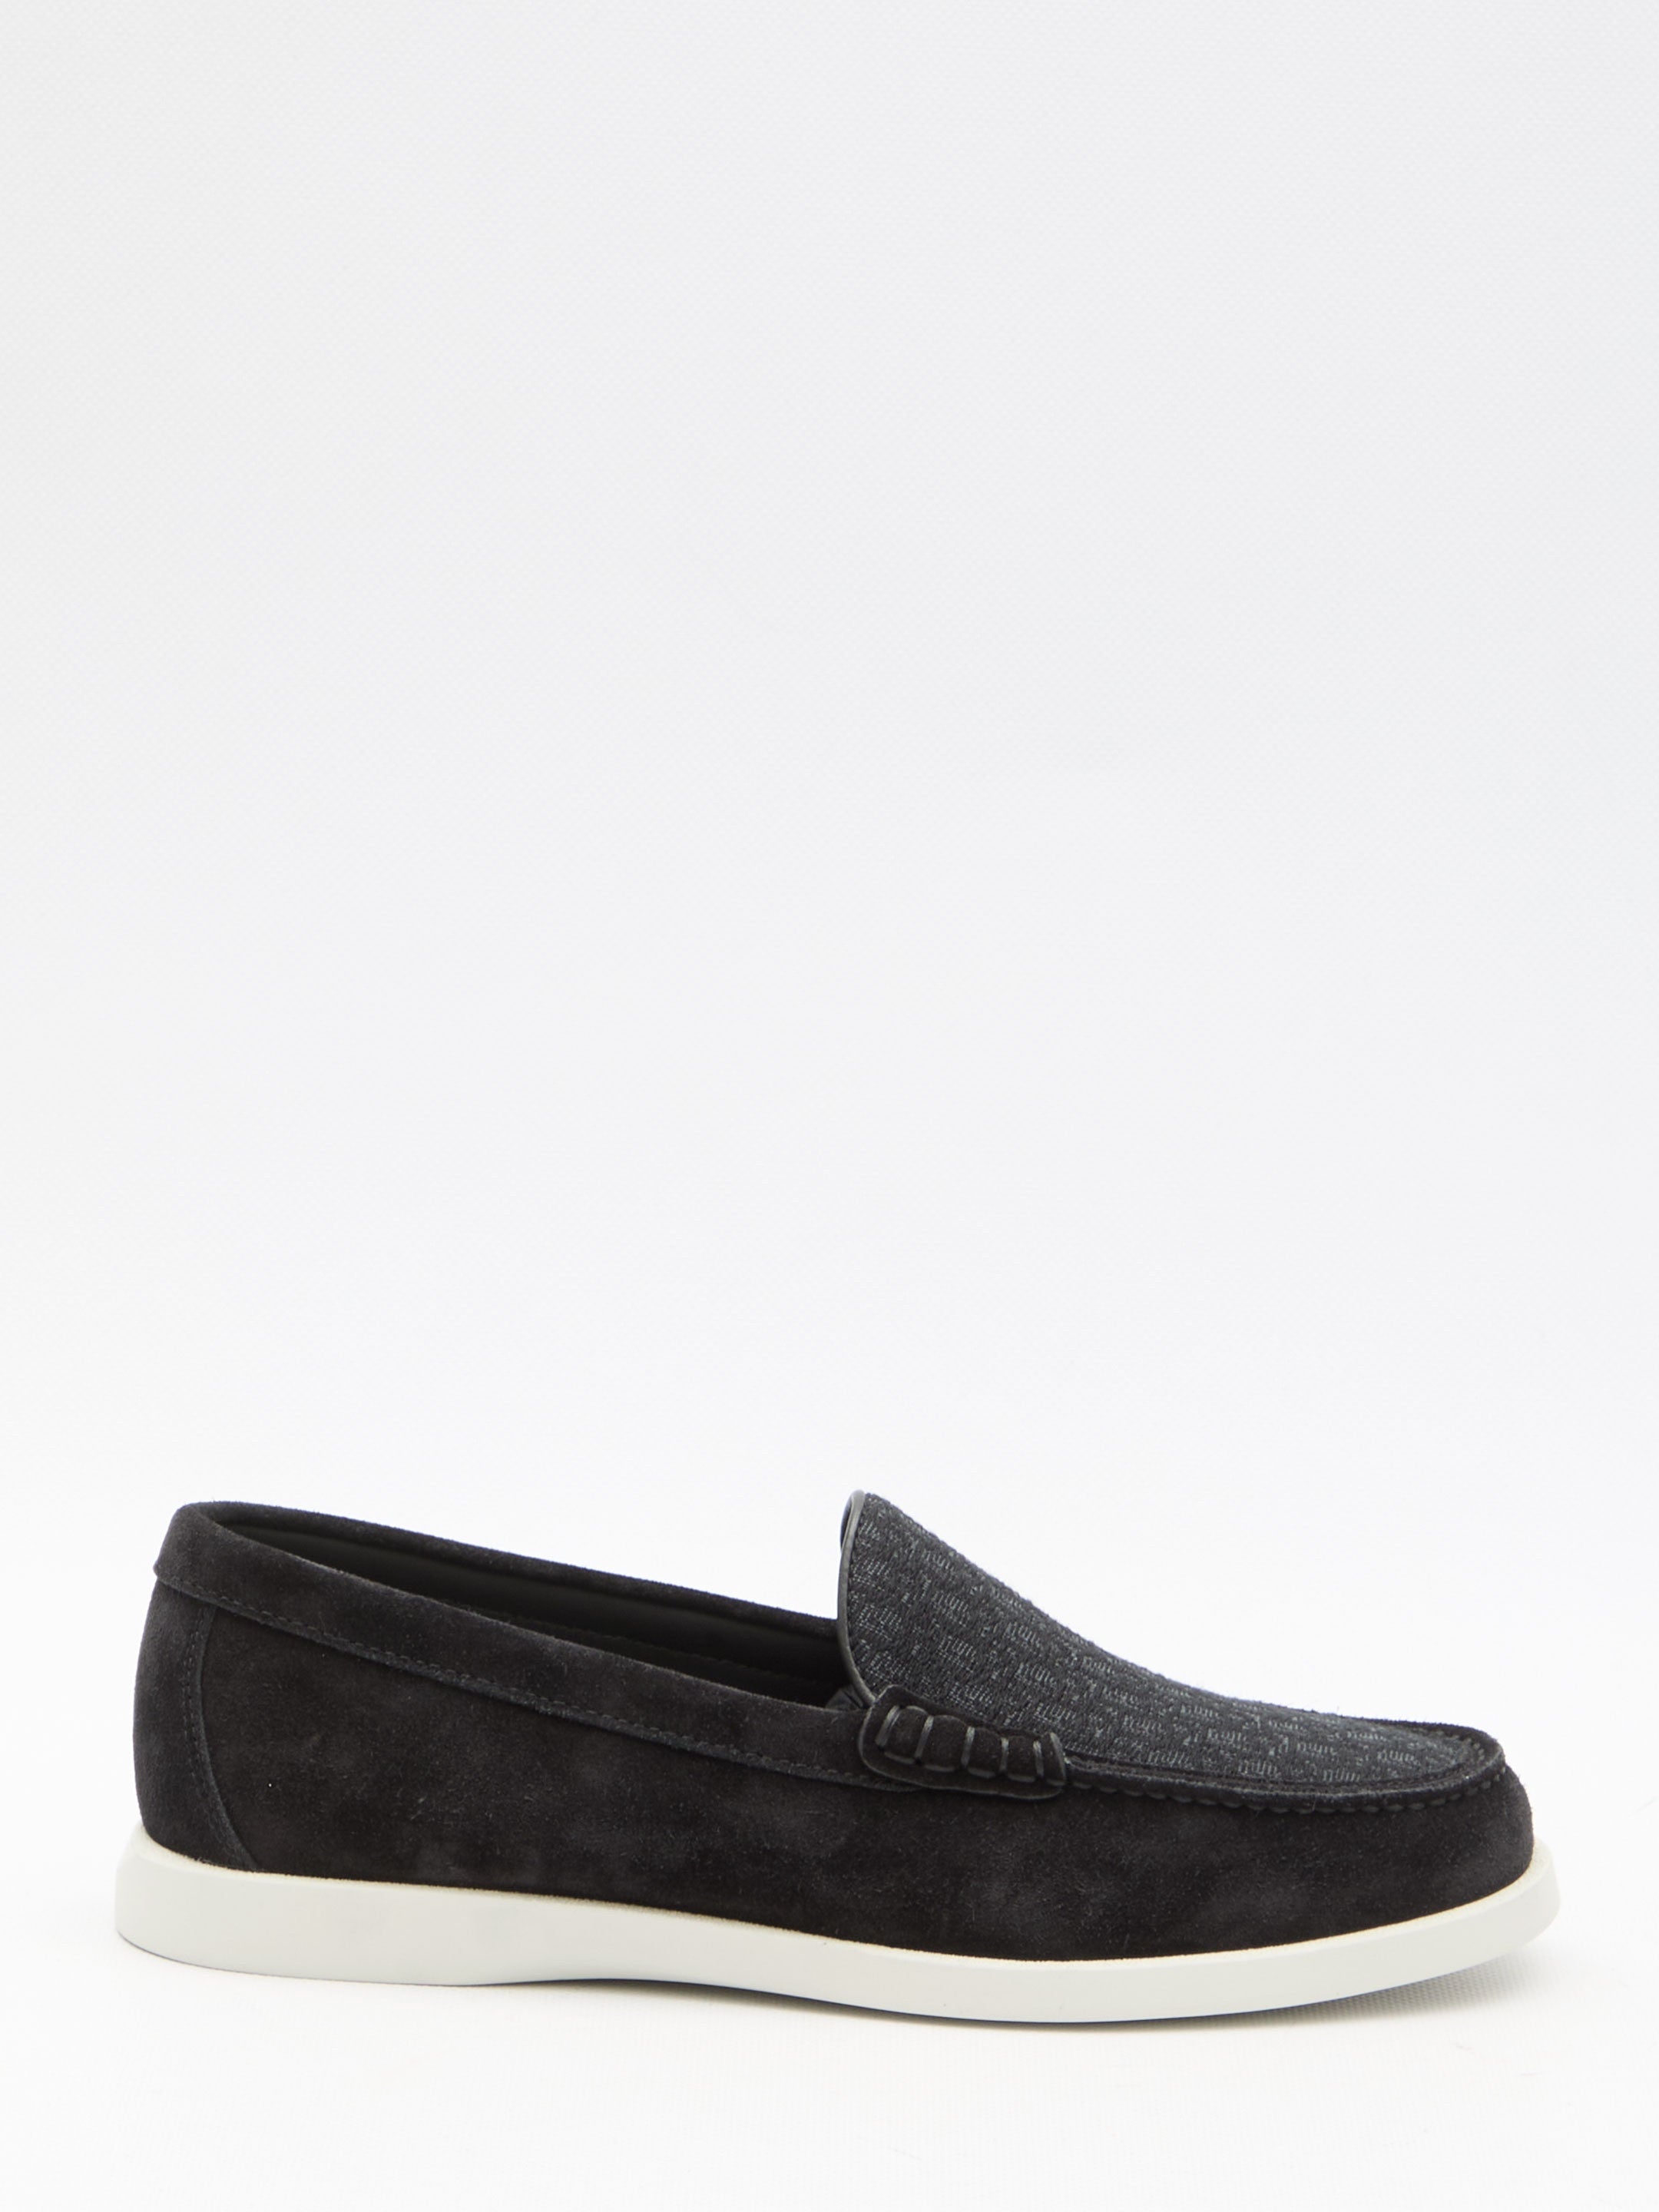 DIOR-HOMME-OUTLET-SALE-Dior-Granville-loafers-Flache-Schuhe-40-BLACK-ARCHIVE-COLLECTION.jpg